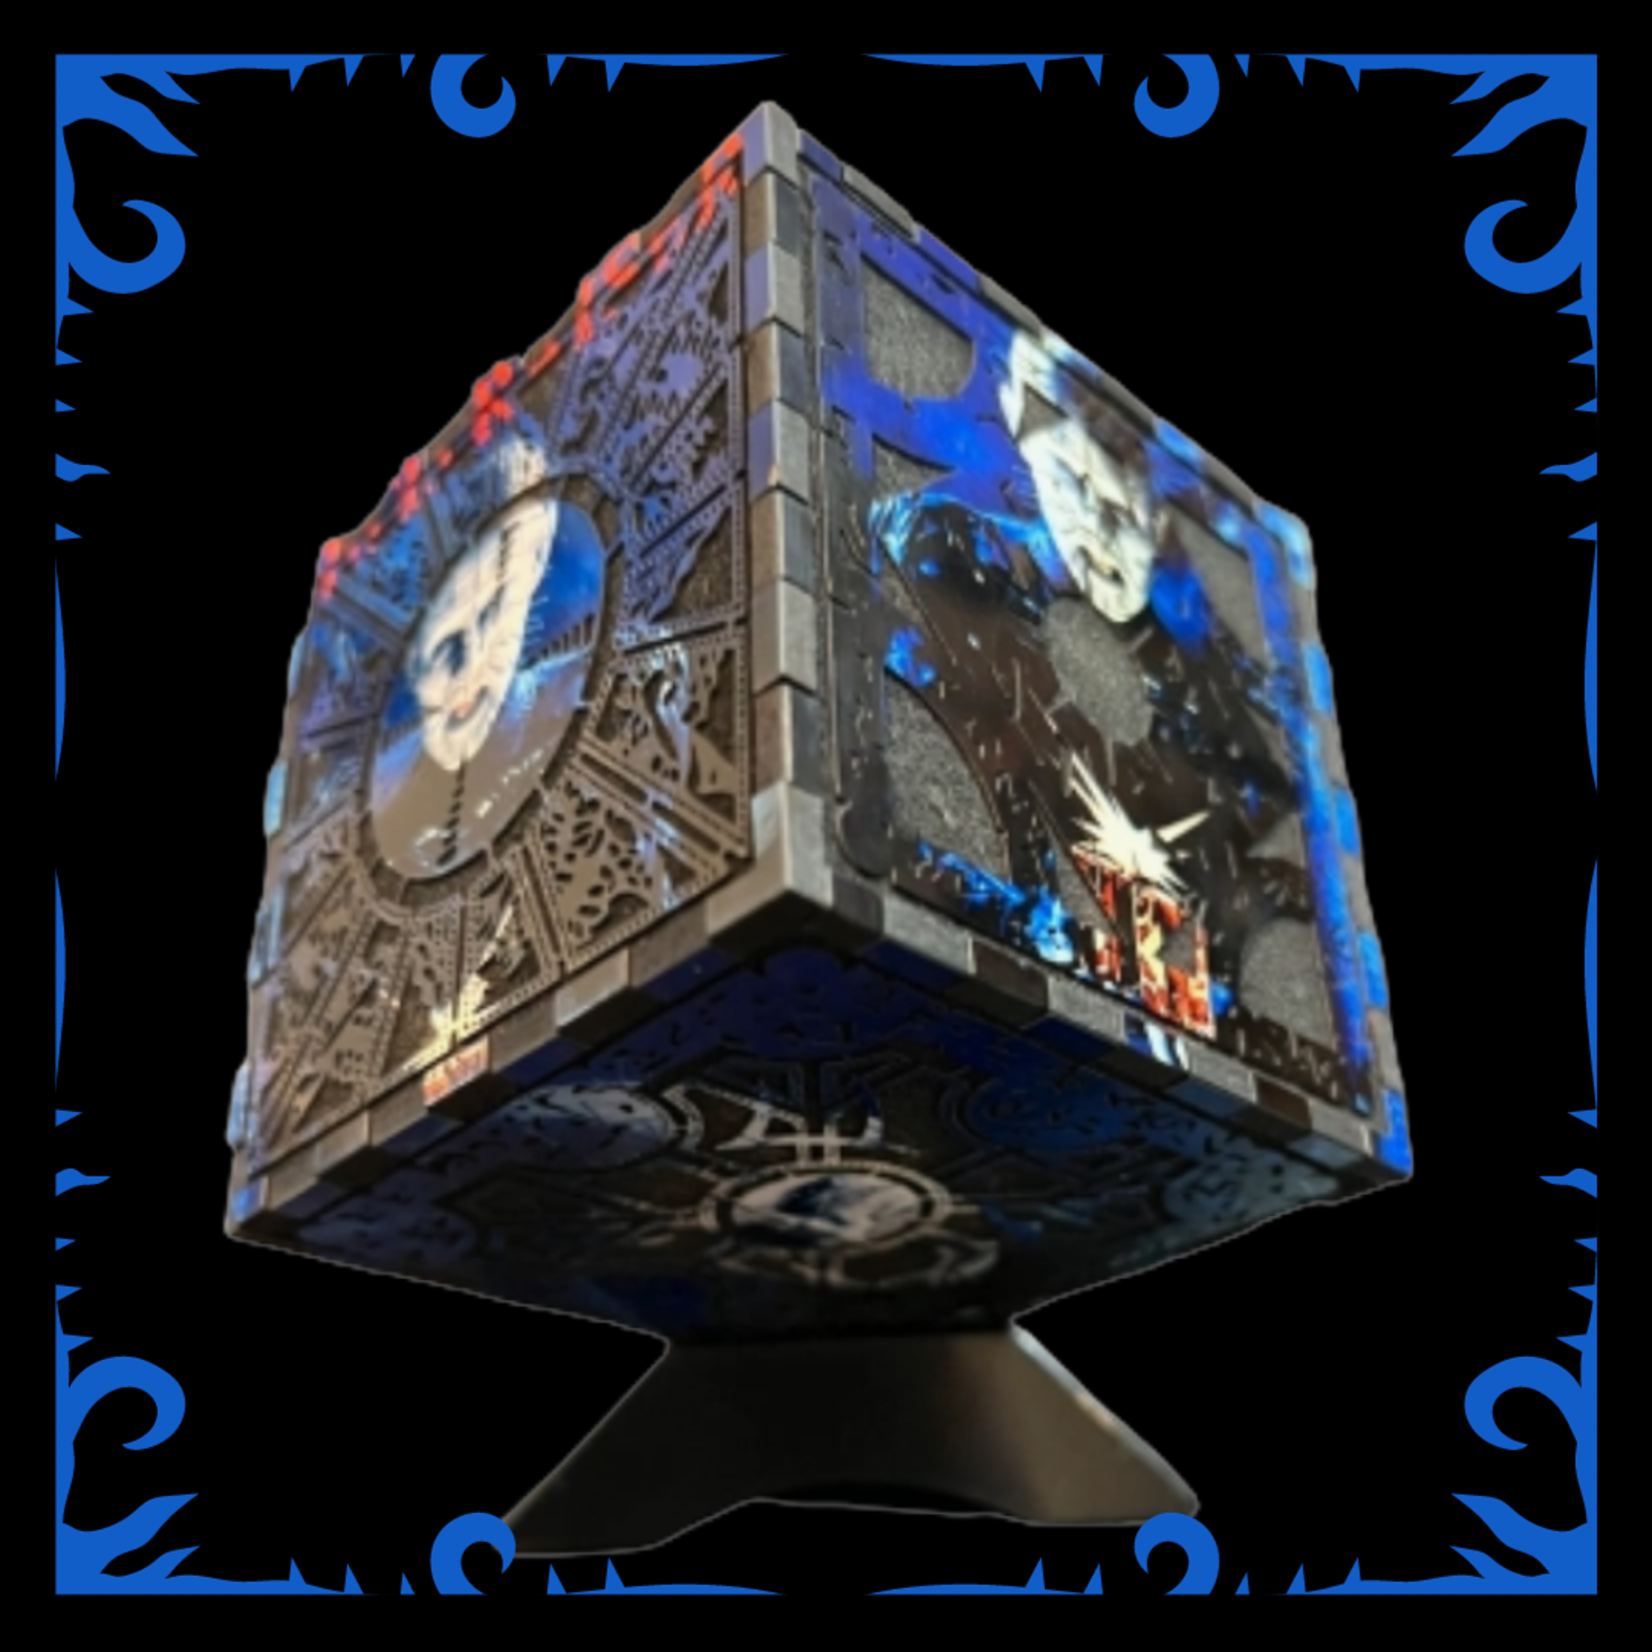 Dead Dave Designs Hellraiser Laser Engraved Puzzle Box Cube w/ Stand